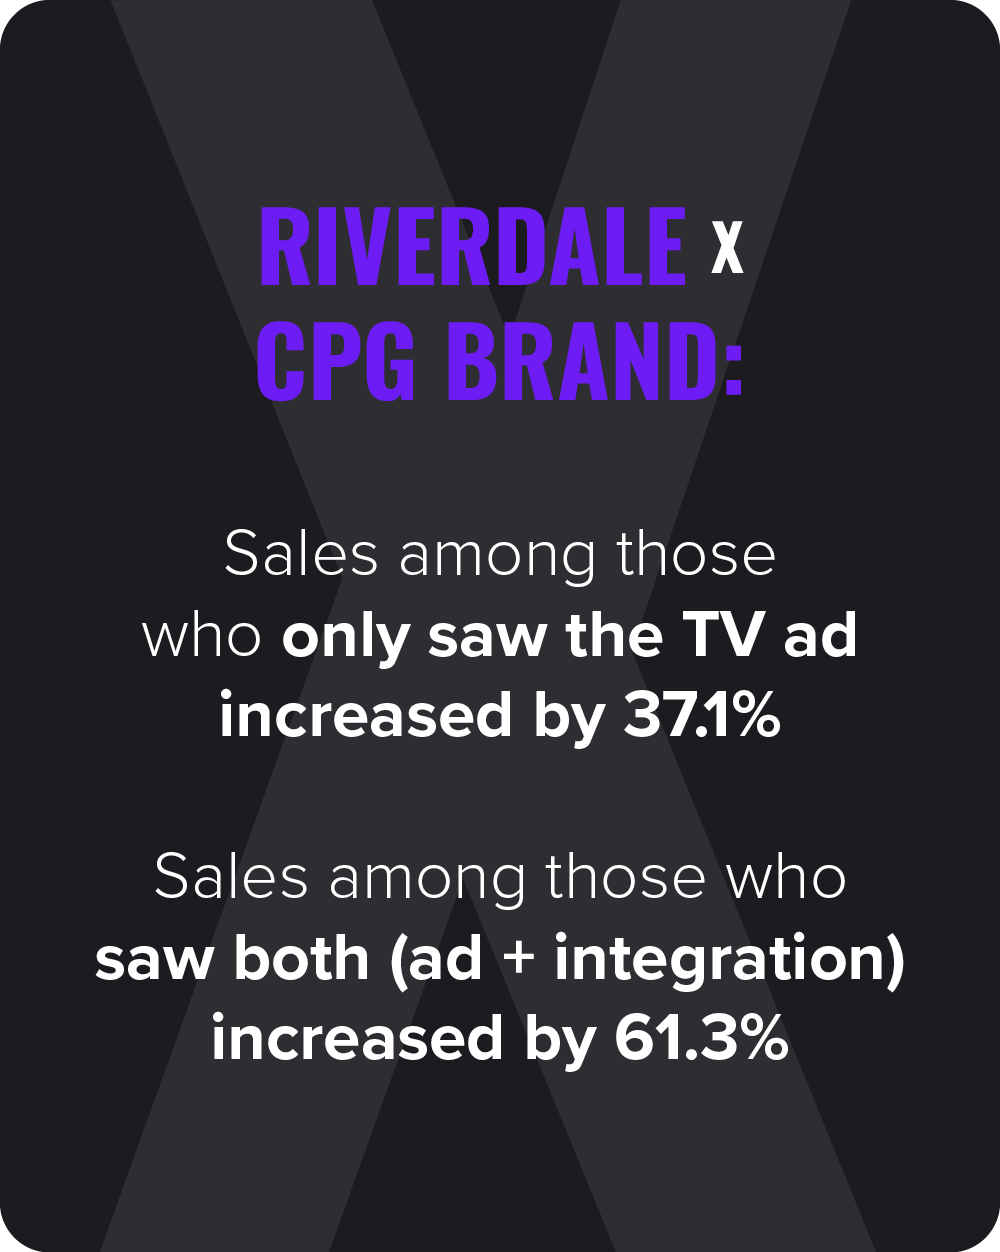 Sales among those who saw both (ad + integration) increased by 61.3%